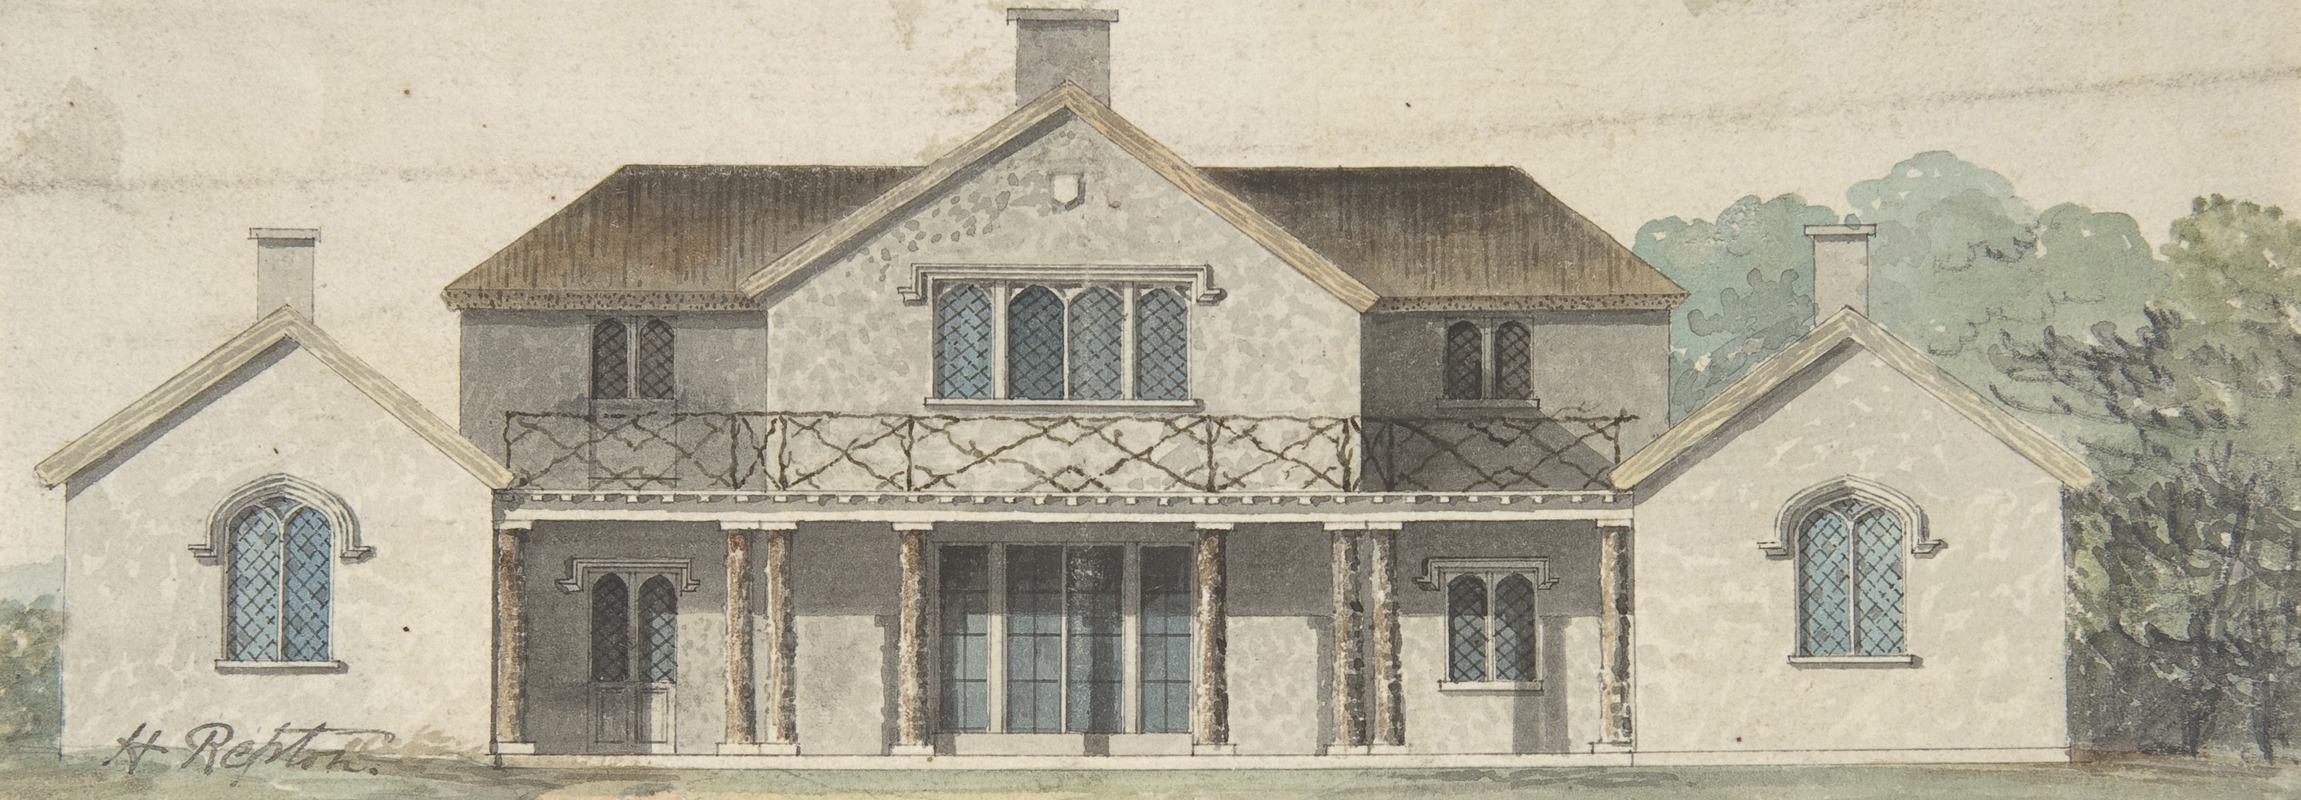 Humphry Repton - Design for a Cottage Ornée in the Tudoresque Style